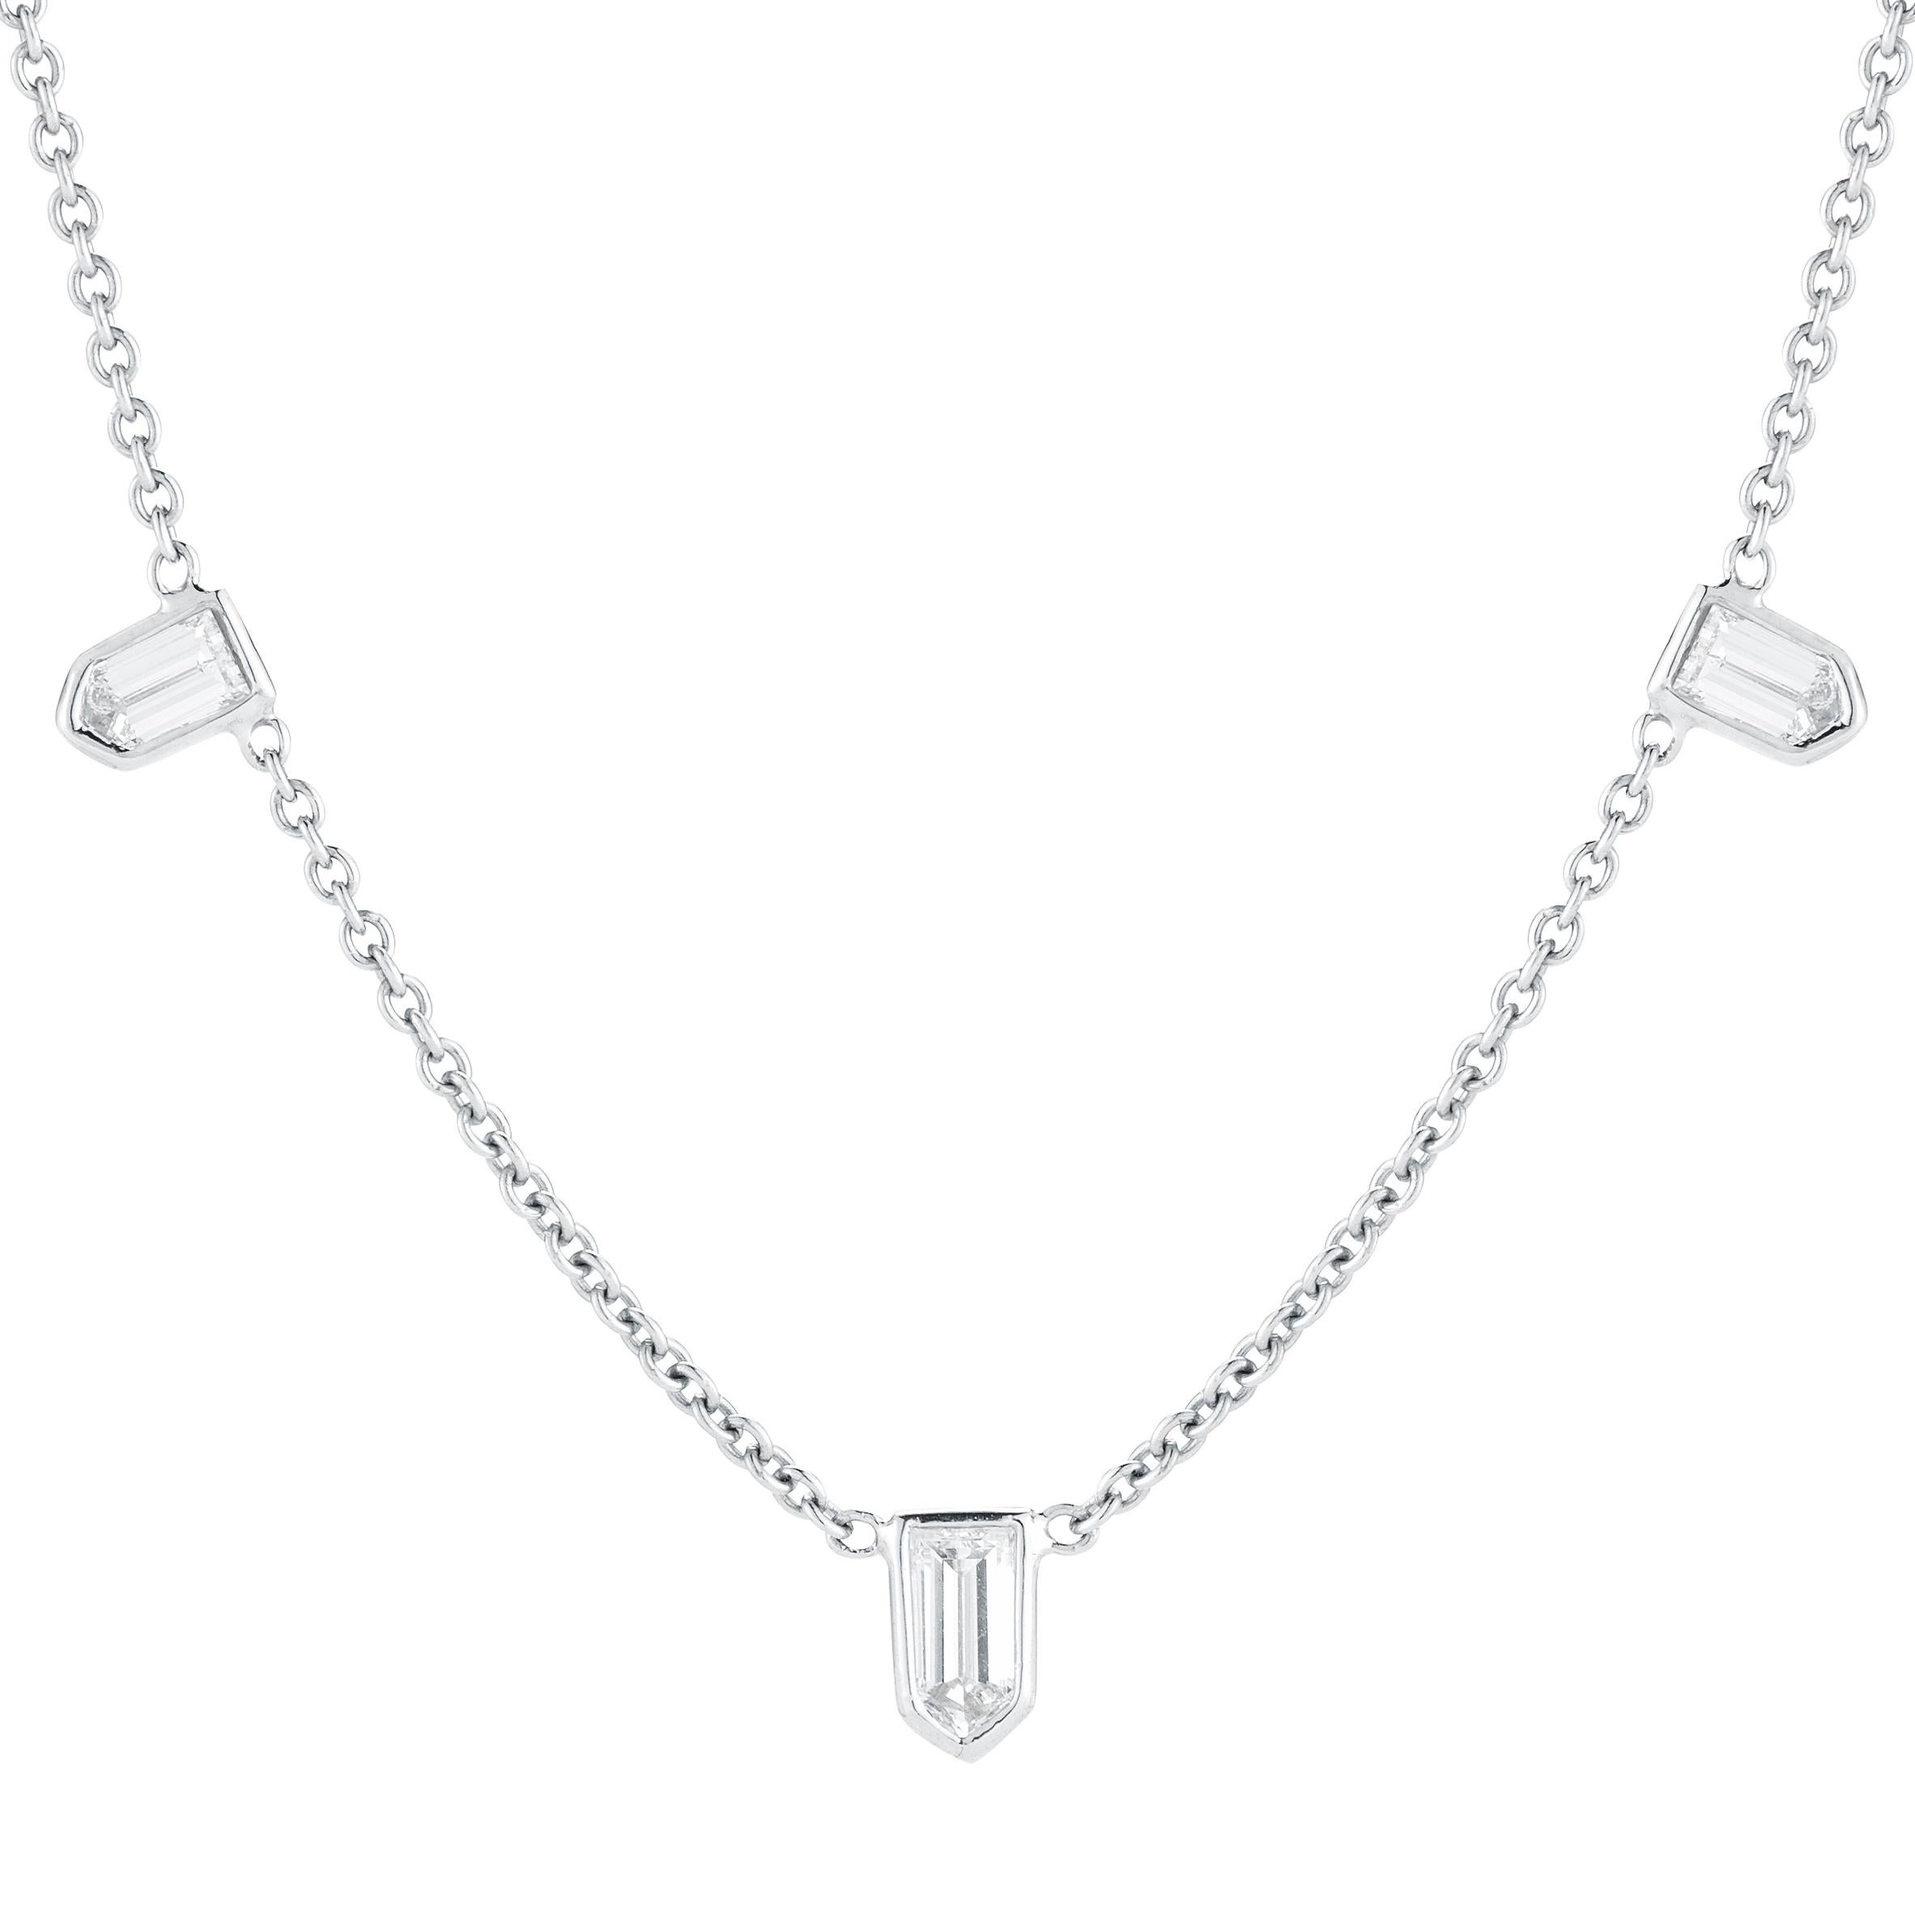 18k White Gold Bullet Diamond Necklace

The diamonds' shape is called 